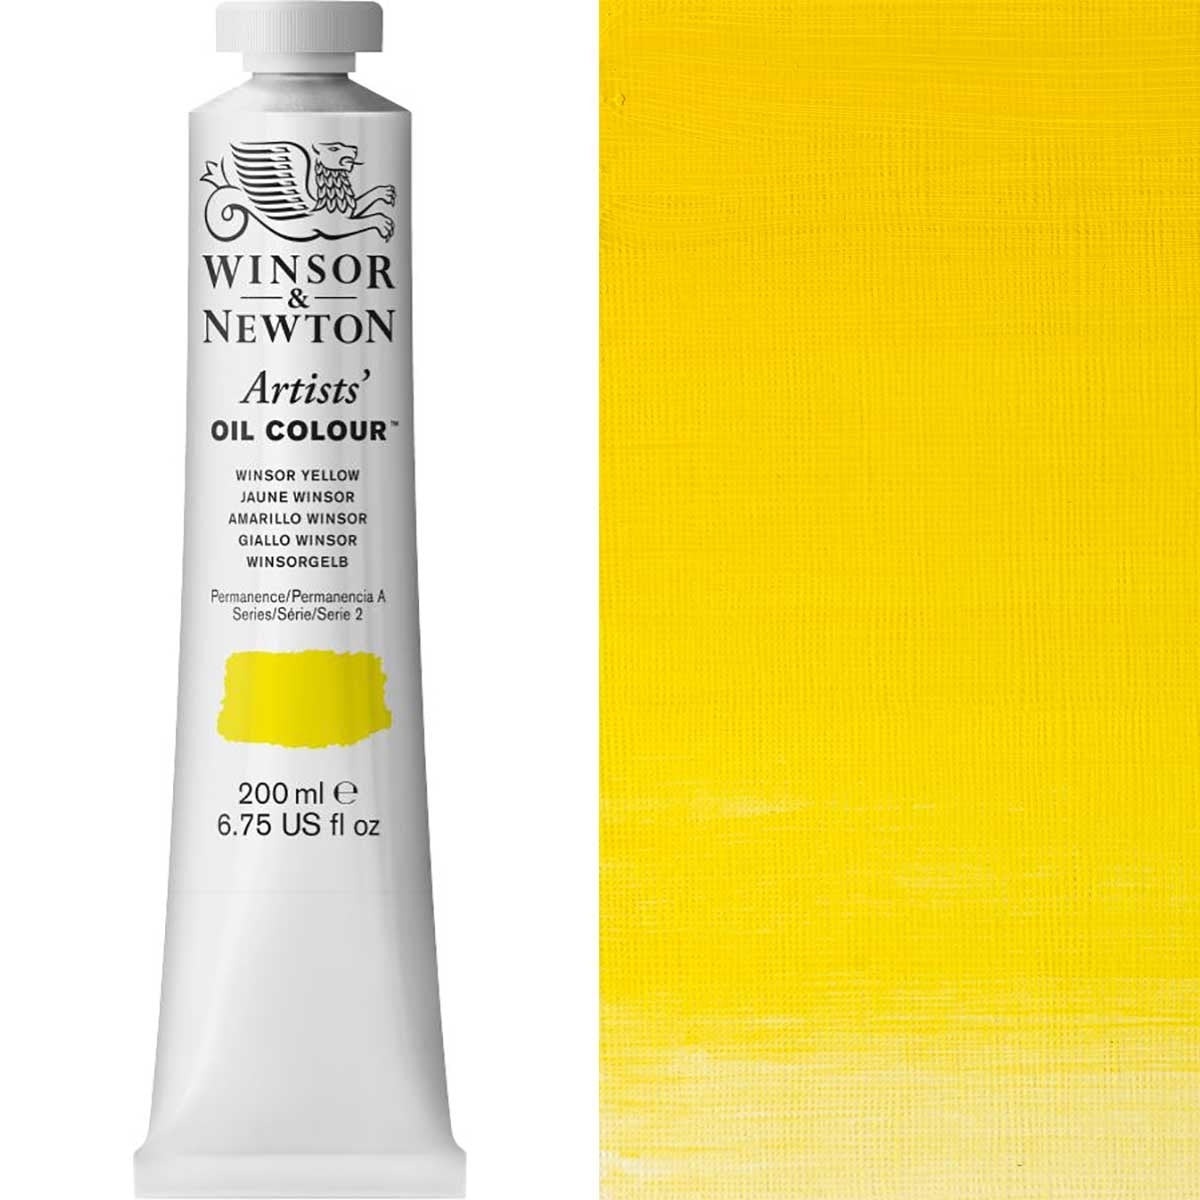 Winsor and Newton - Artists' Oil Colour - 200ml - Winsor Yellow